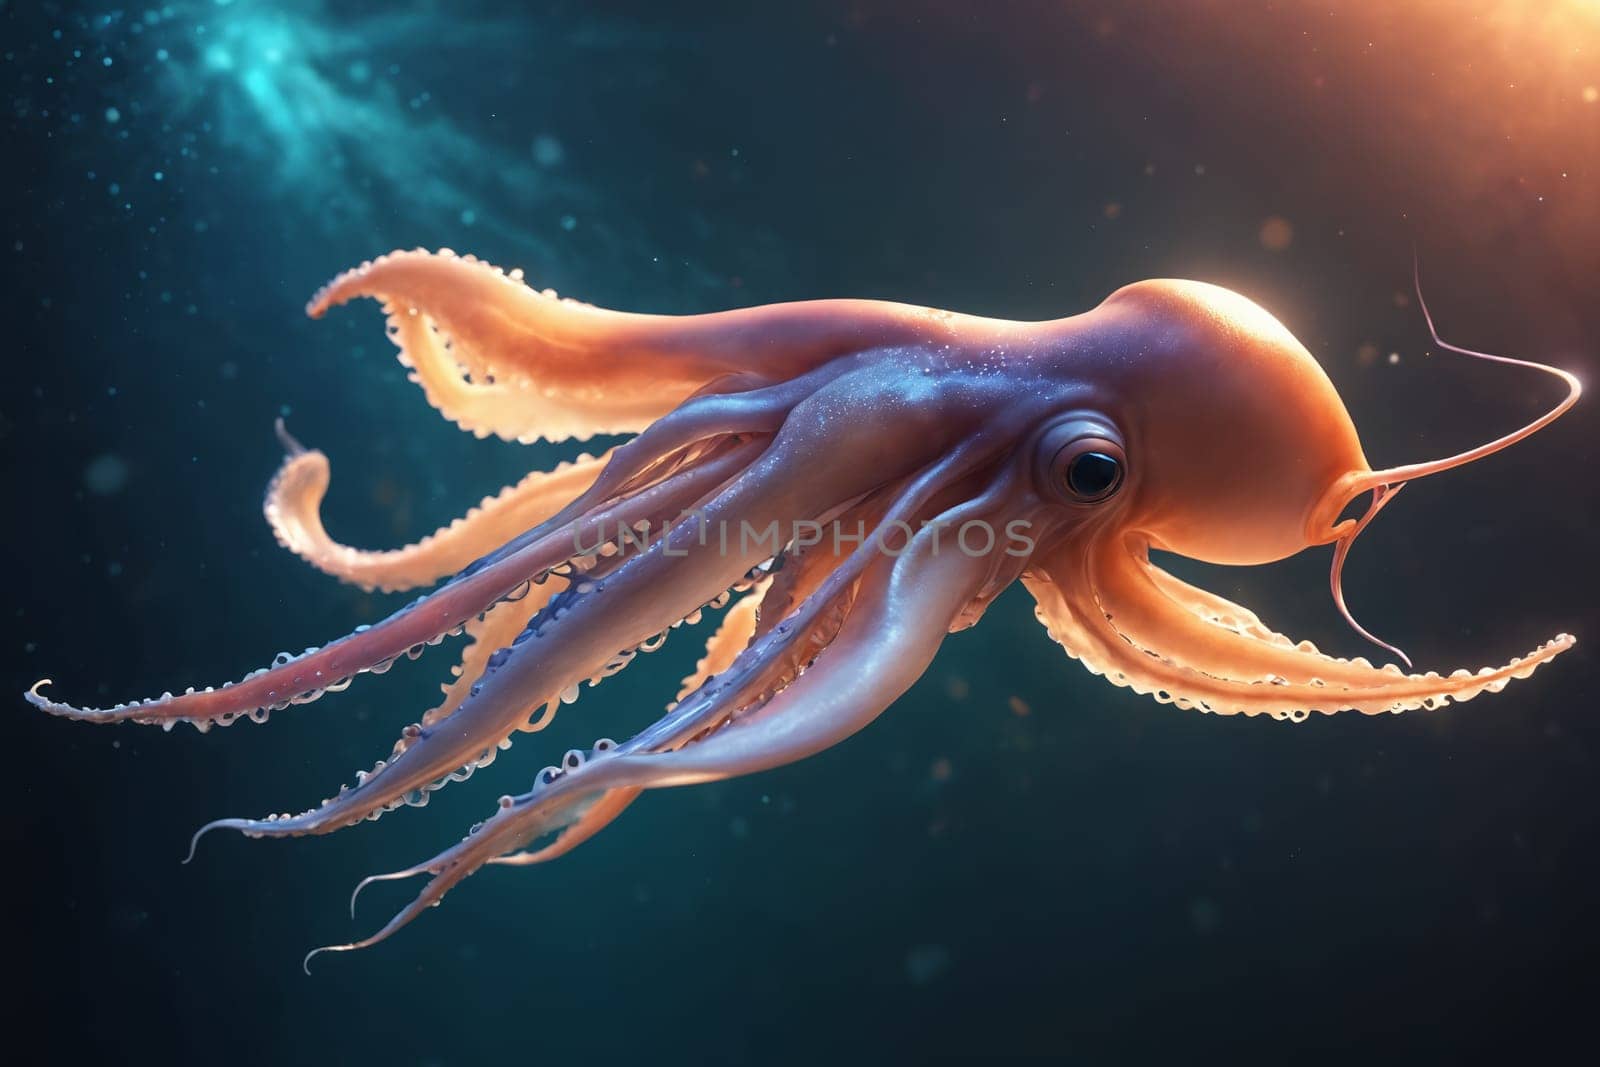 "Marine Mastermind: Octopus Displaying Intelligent Gaze" by Andre1ns